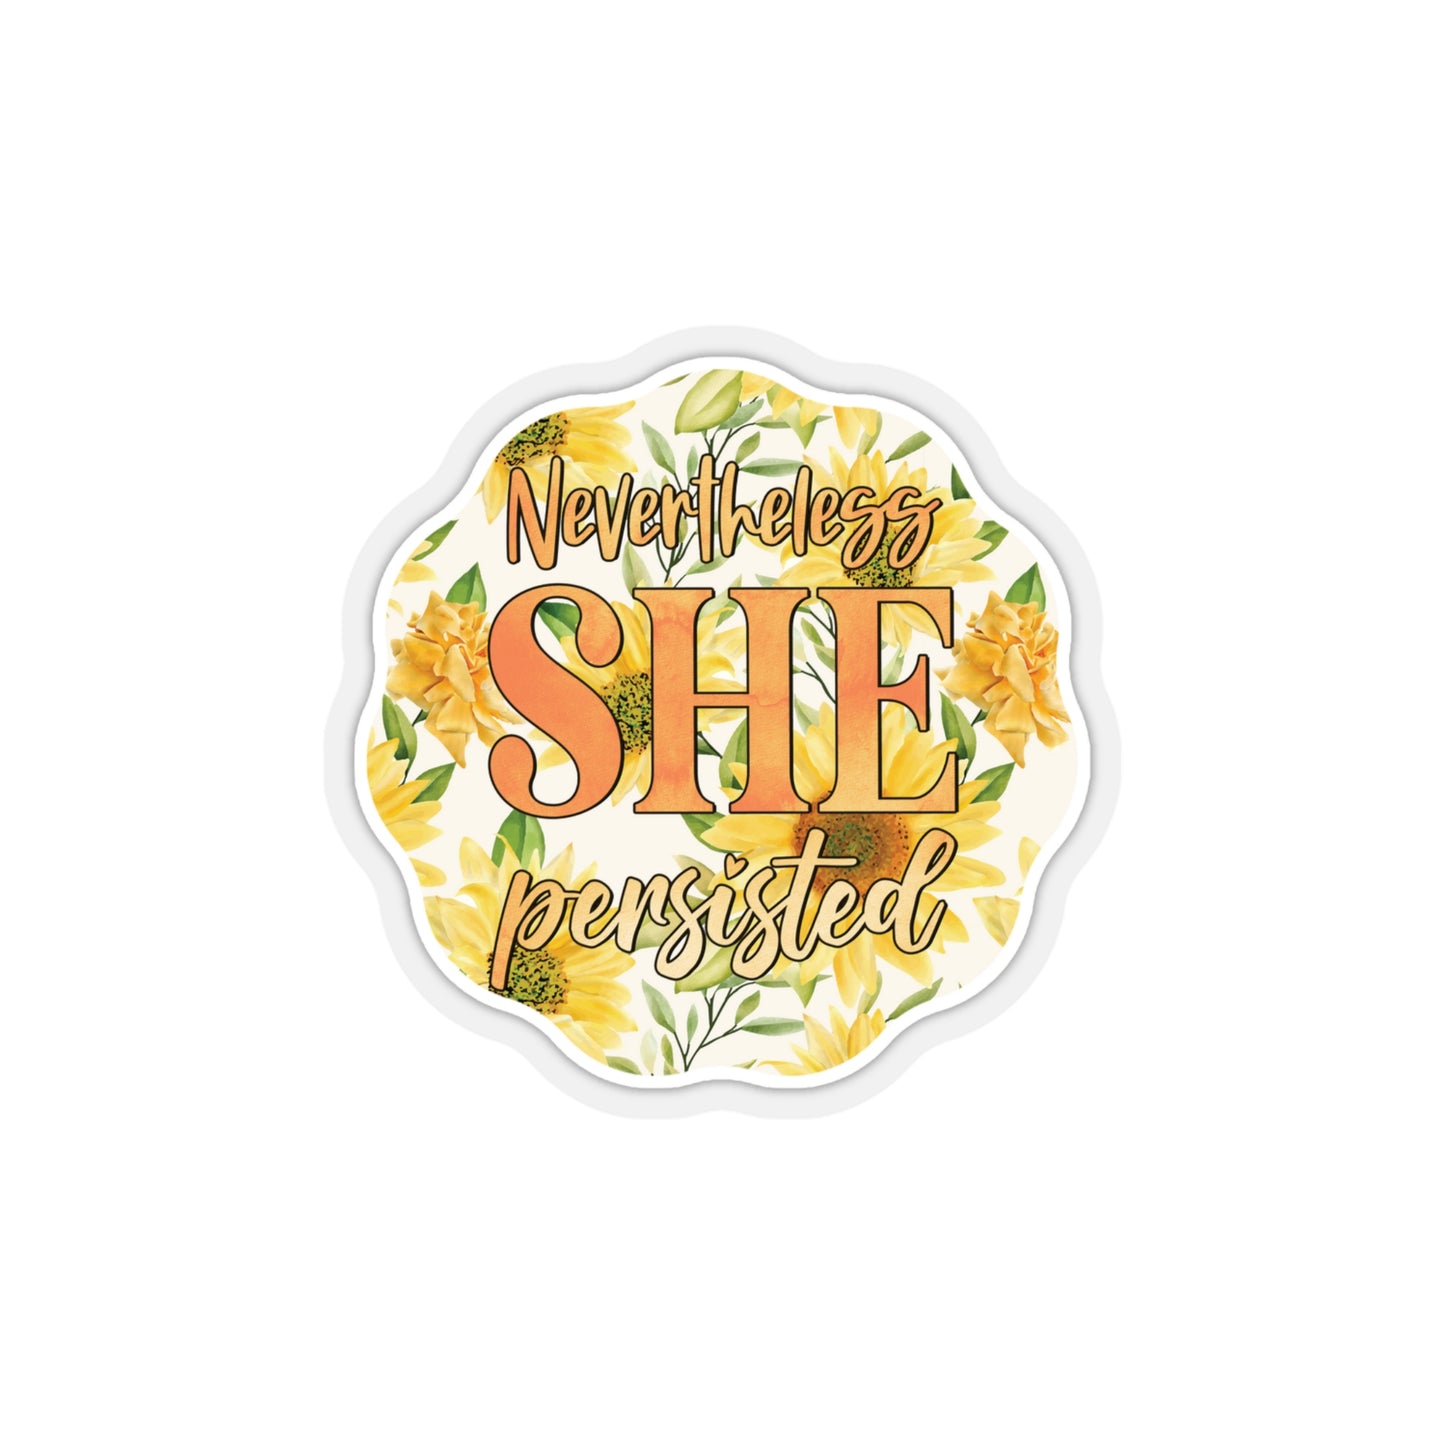 Nevertheless She Persisted Sticker Bright Colors | Fun Stickers | Happy Stickers | Must Have Stickers | Laptop Stickers | Best Stickers